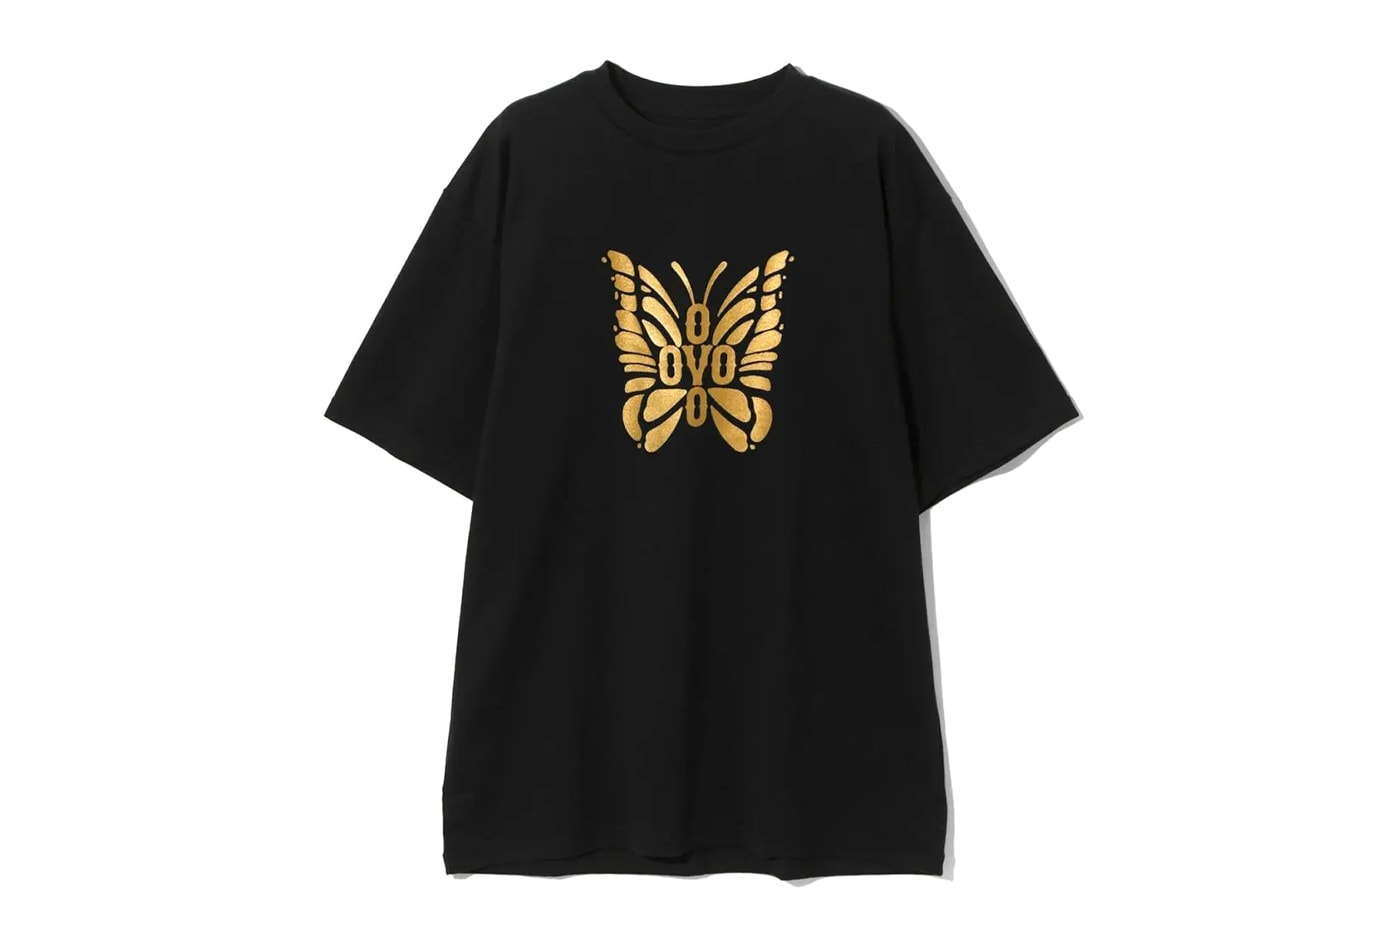 NEEDLES and OVO Drop First Ever Collaboration drake owl butterfly tracksuits t-shirt bandana accessories